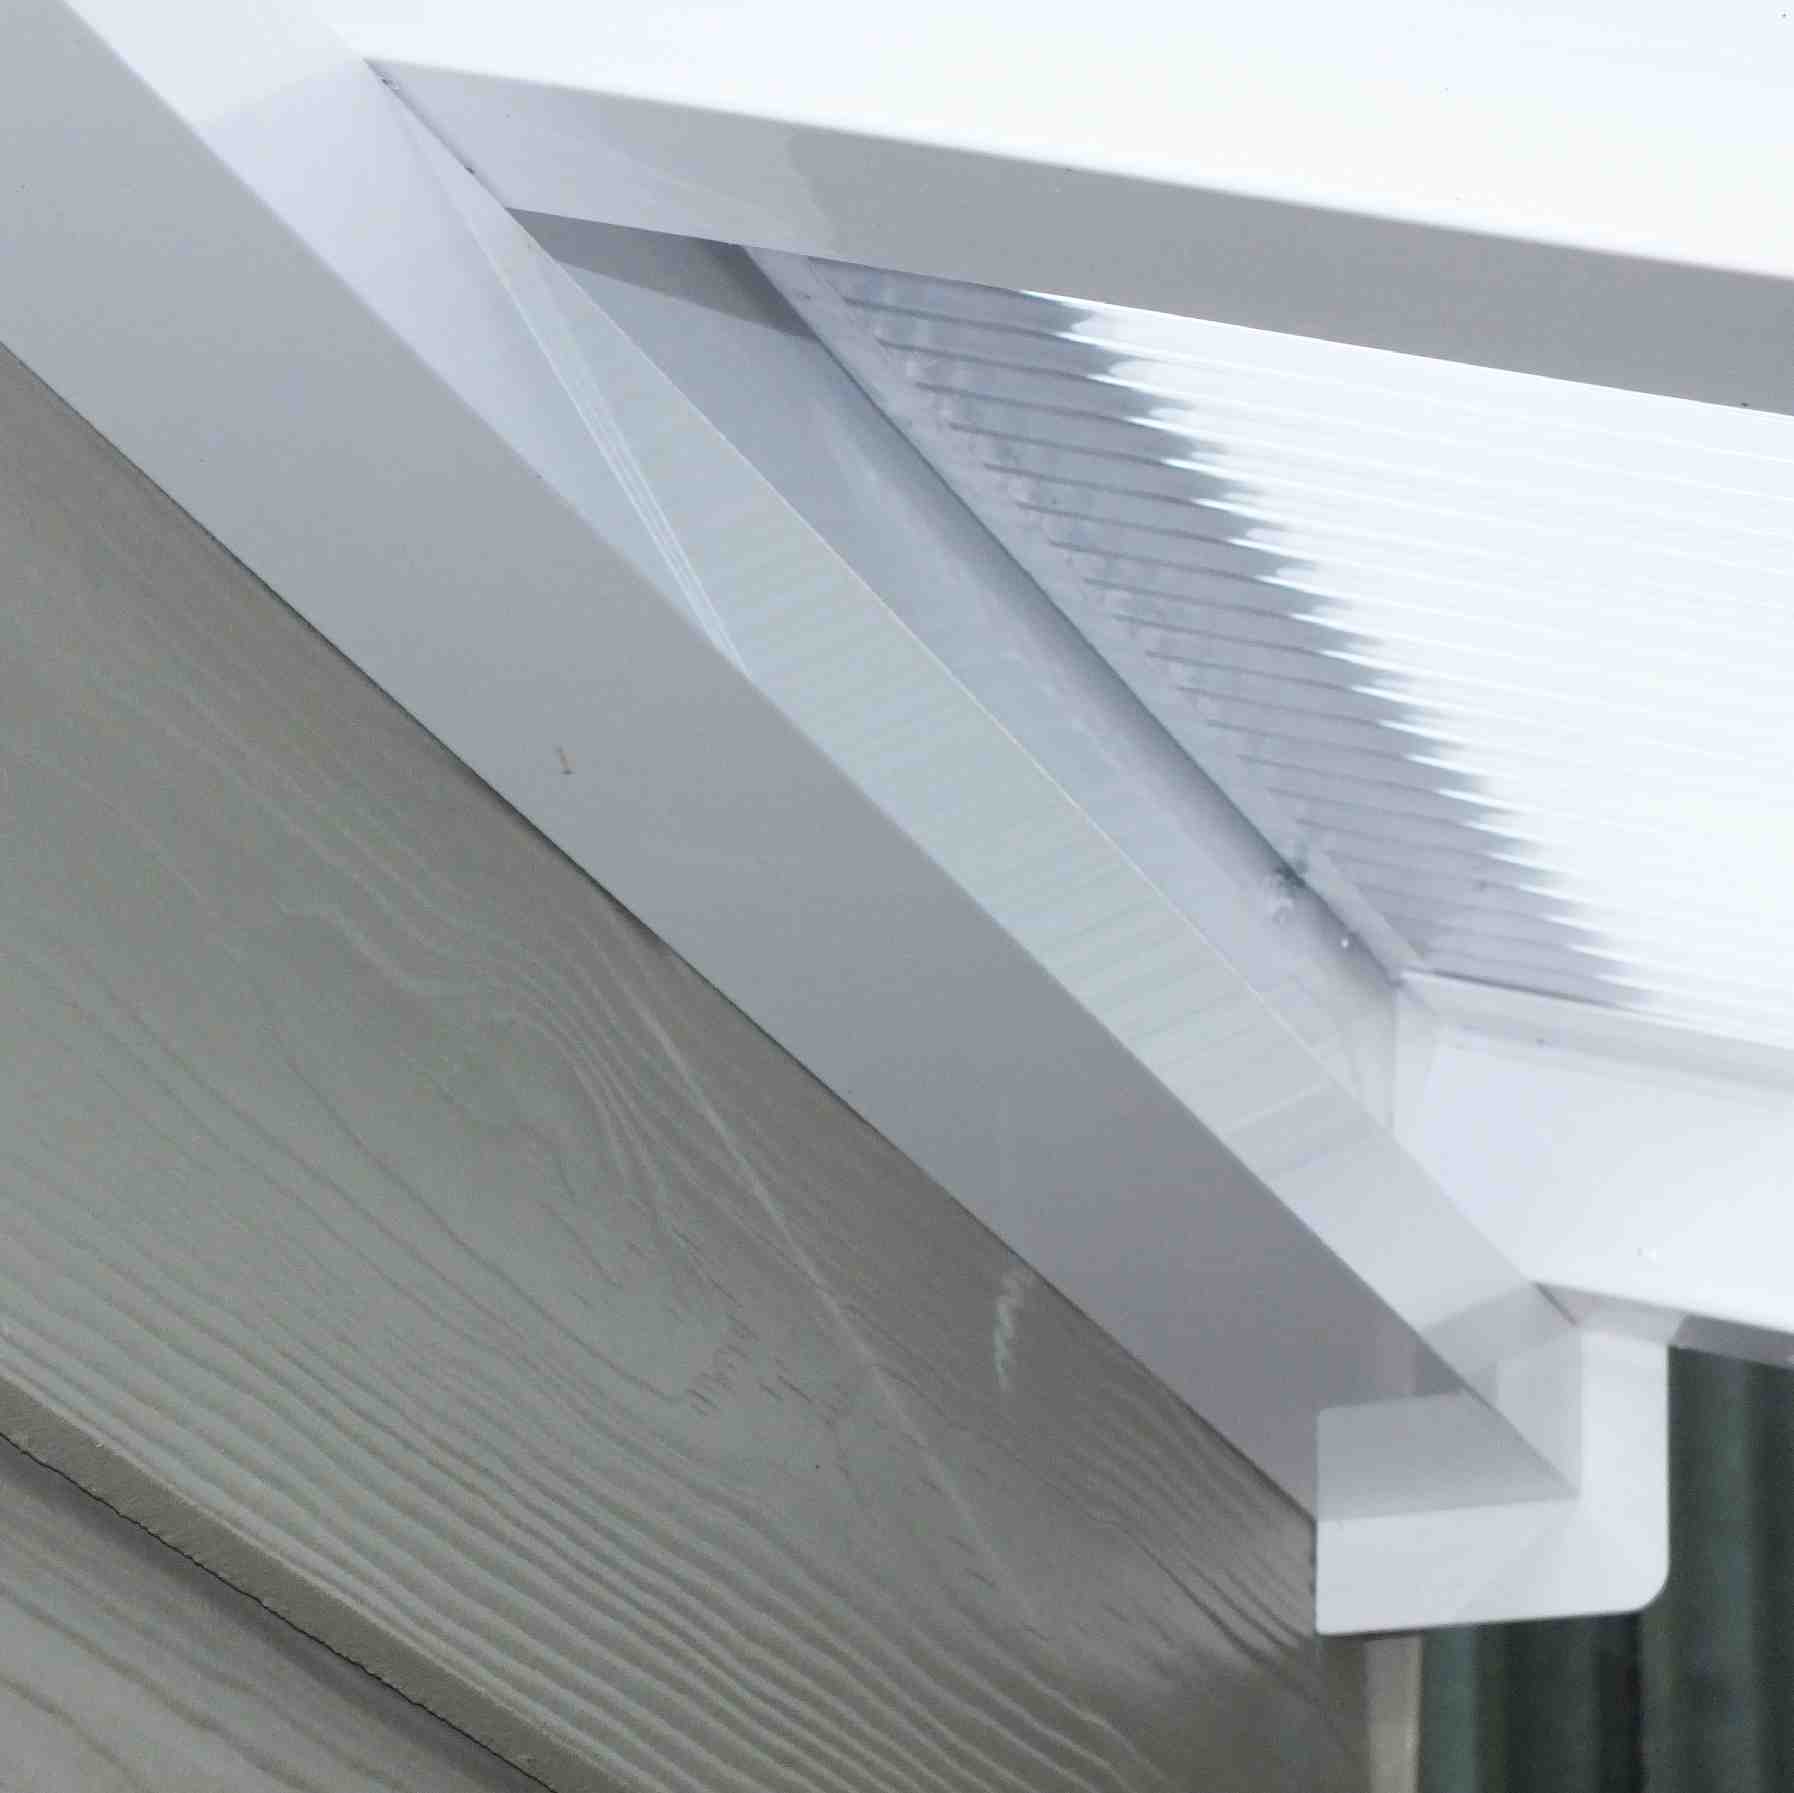 Great deals on Omega Verandah White with 16mm Polycarbonate Glazing - 12.0m (W) x 3.0m (P), (5) Supporting Posts